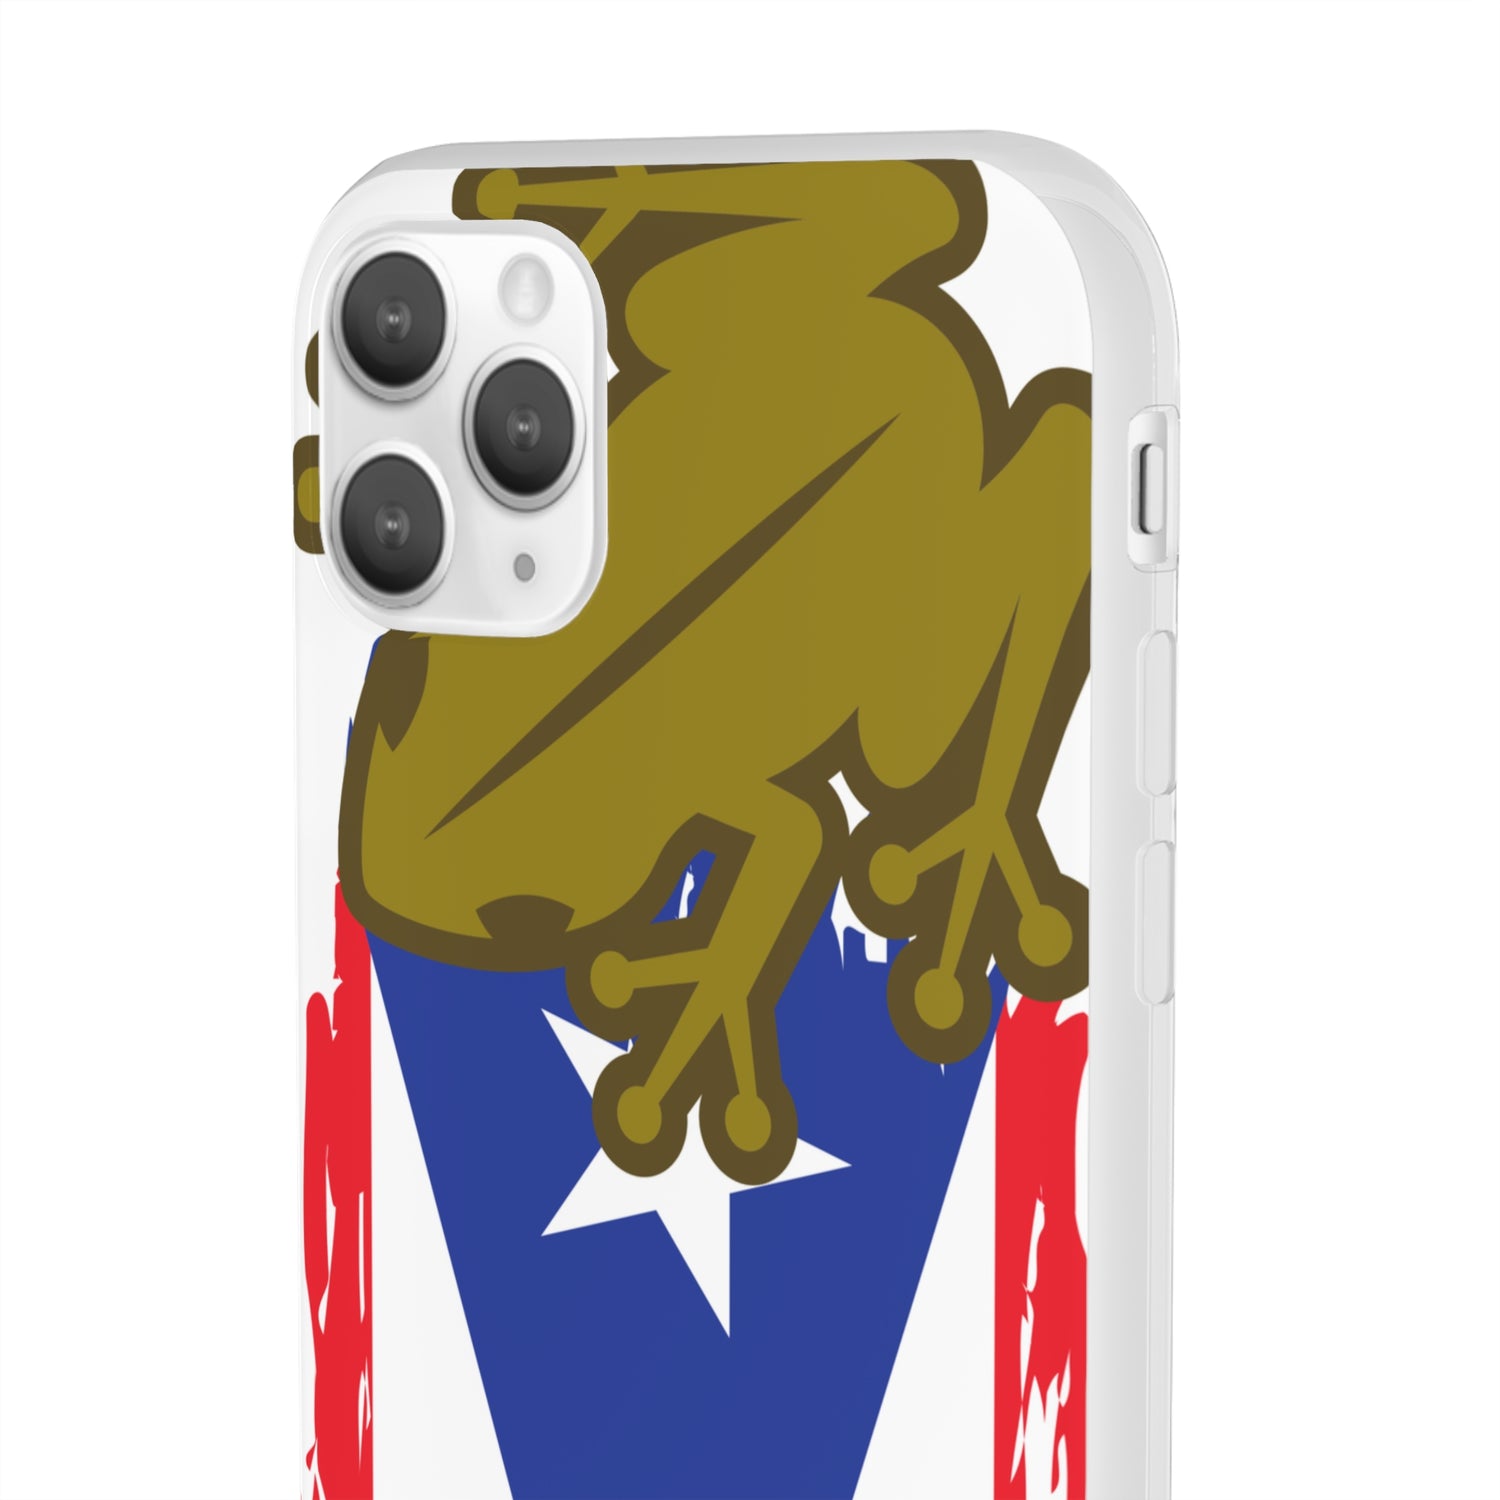 Puerto Rican Phone Flexi Cases (Iphones and Samsung)